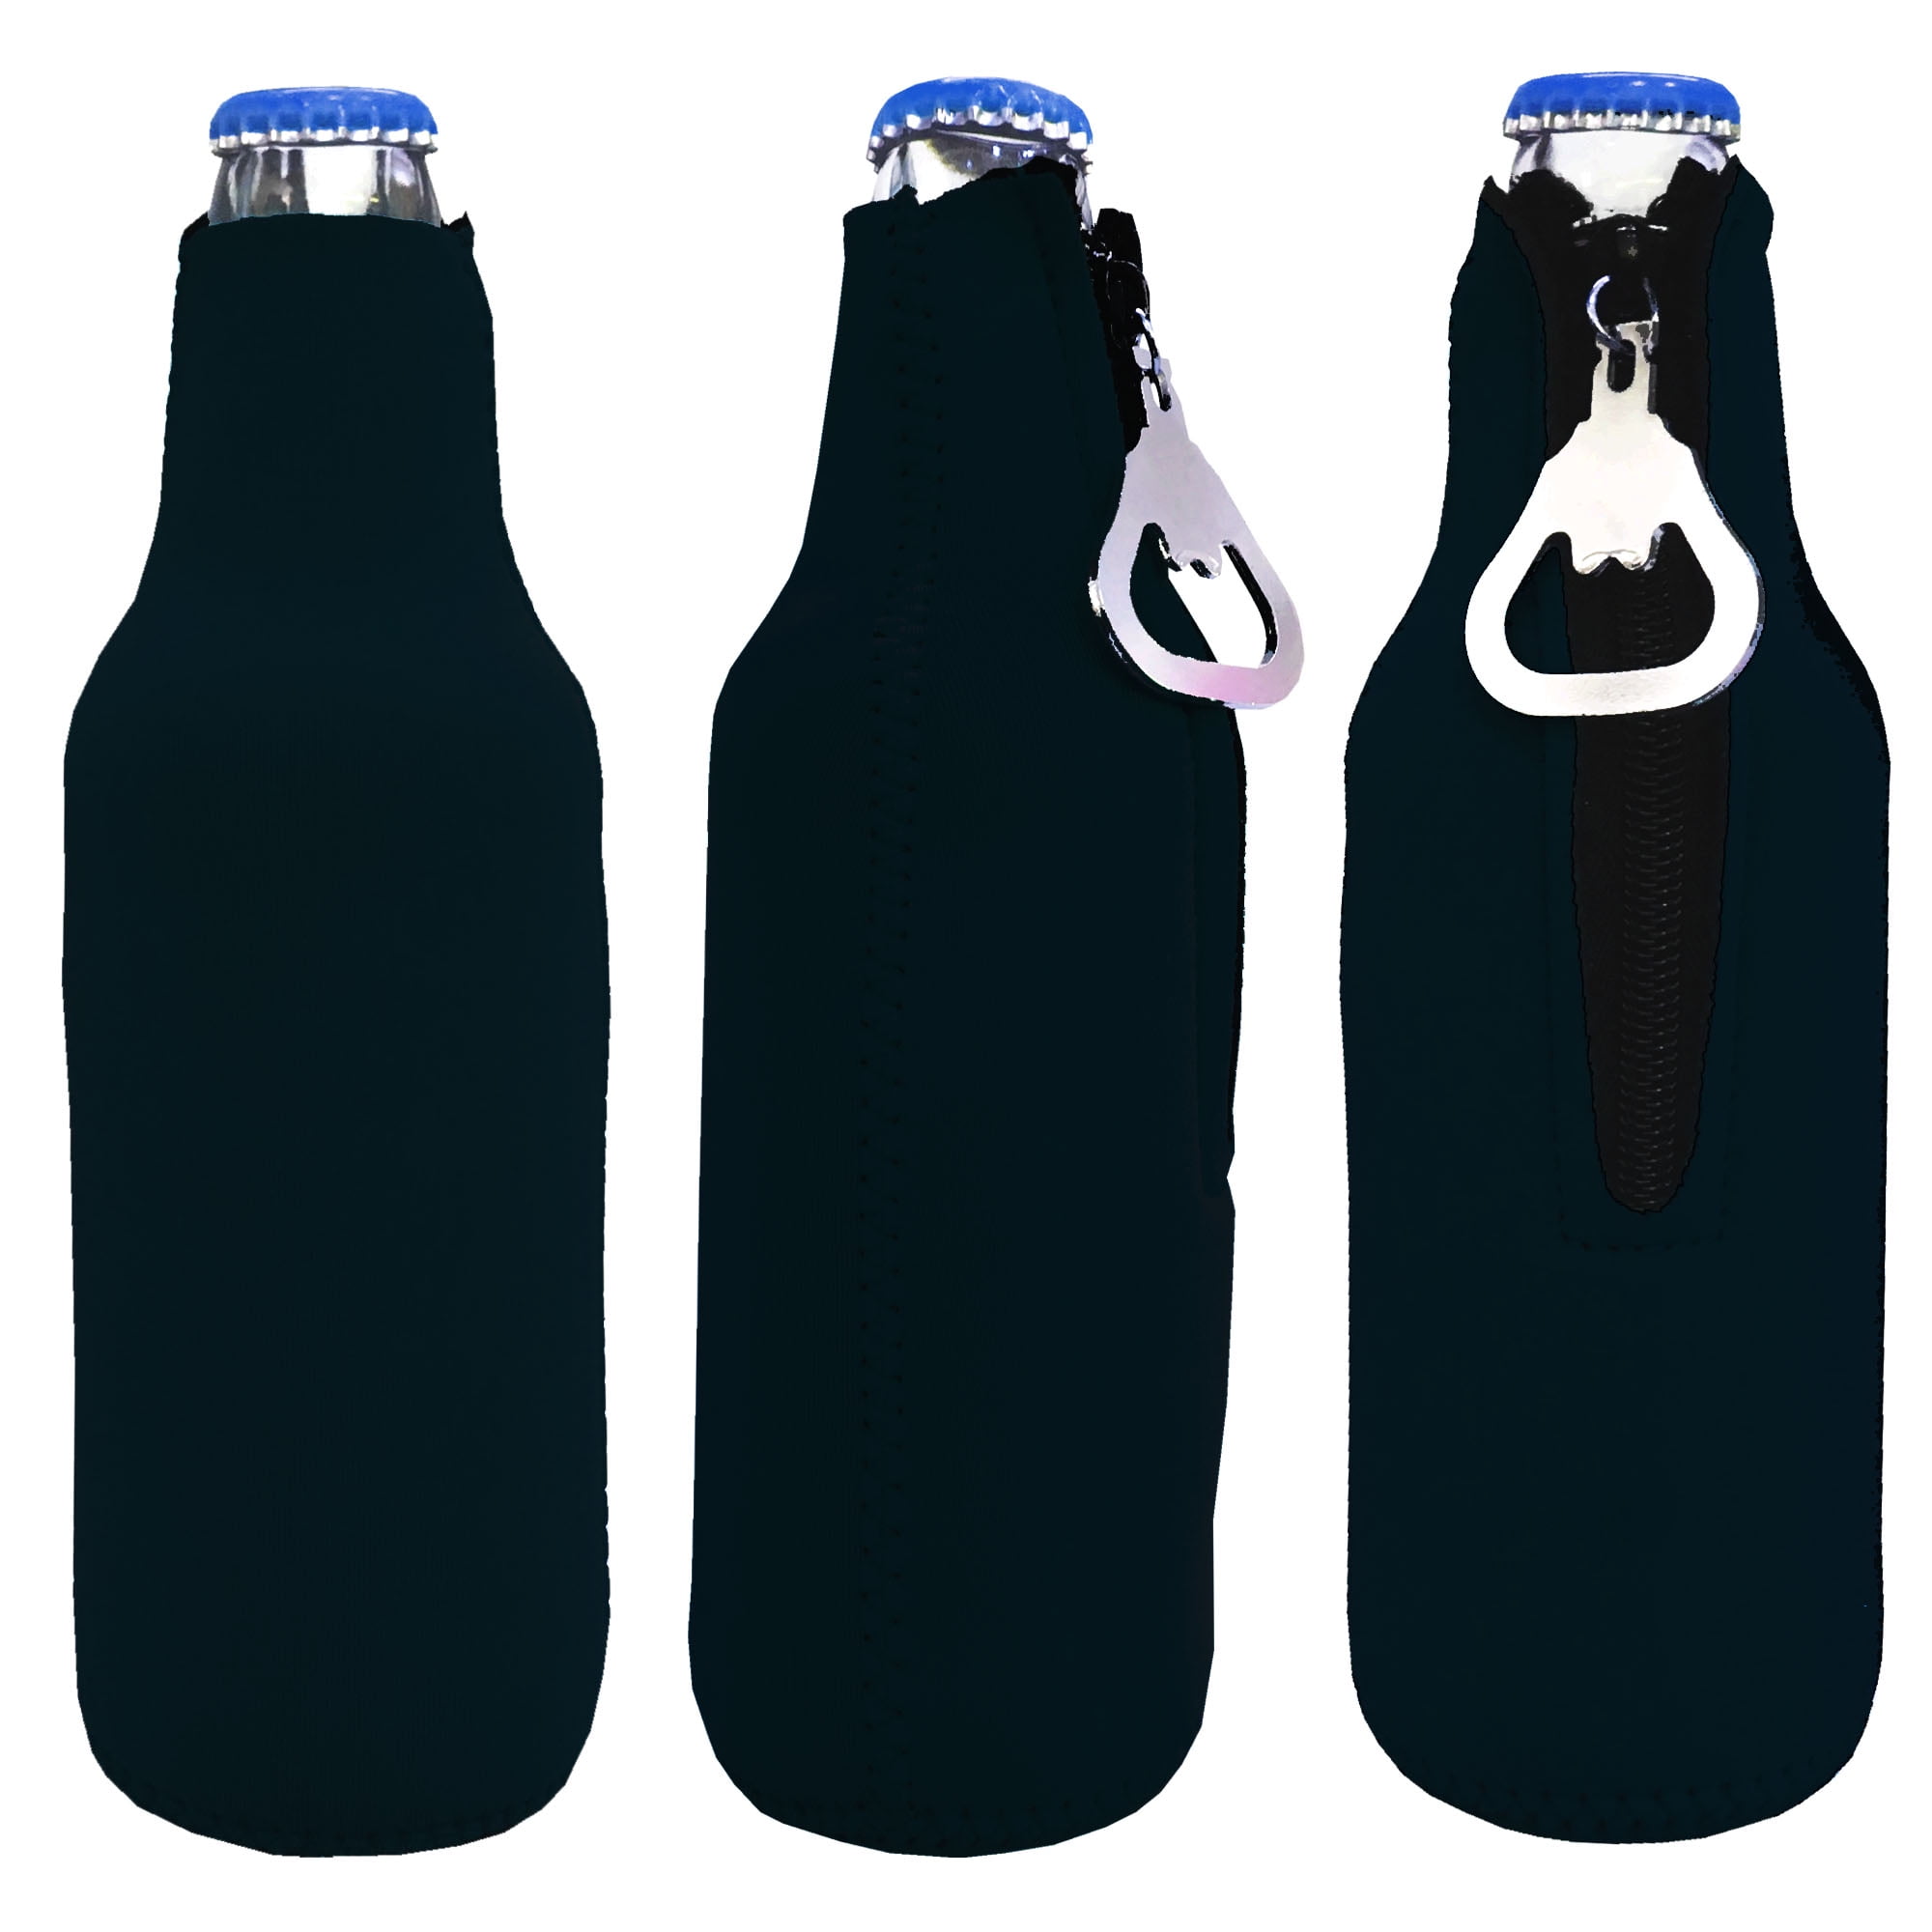 Insulated Neoprene Beer Bottle Coozies Holders to Keep It Cold w/ Bottle Opener 